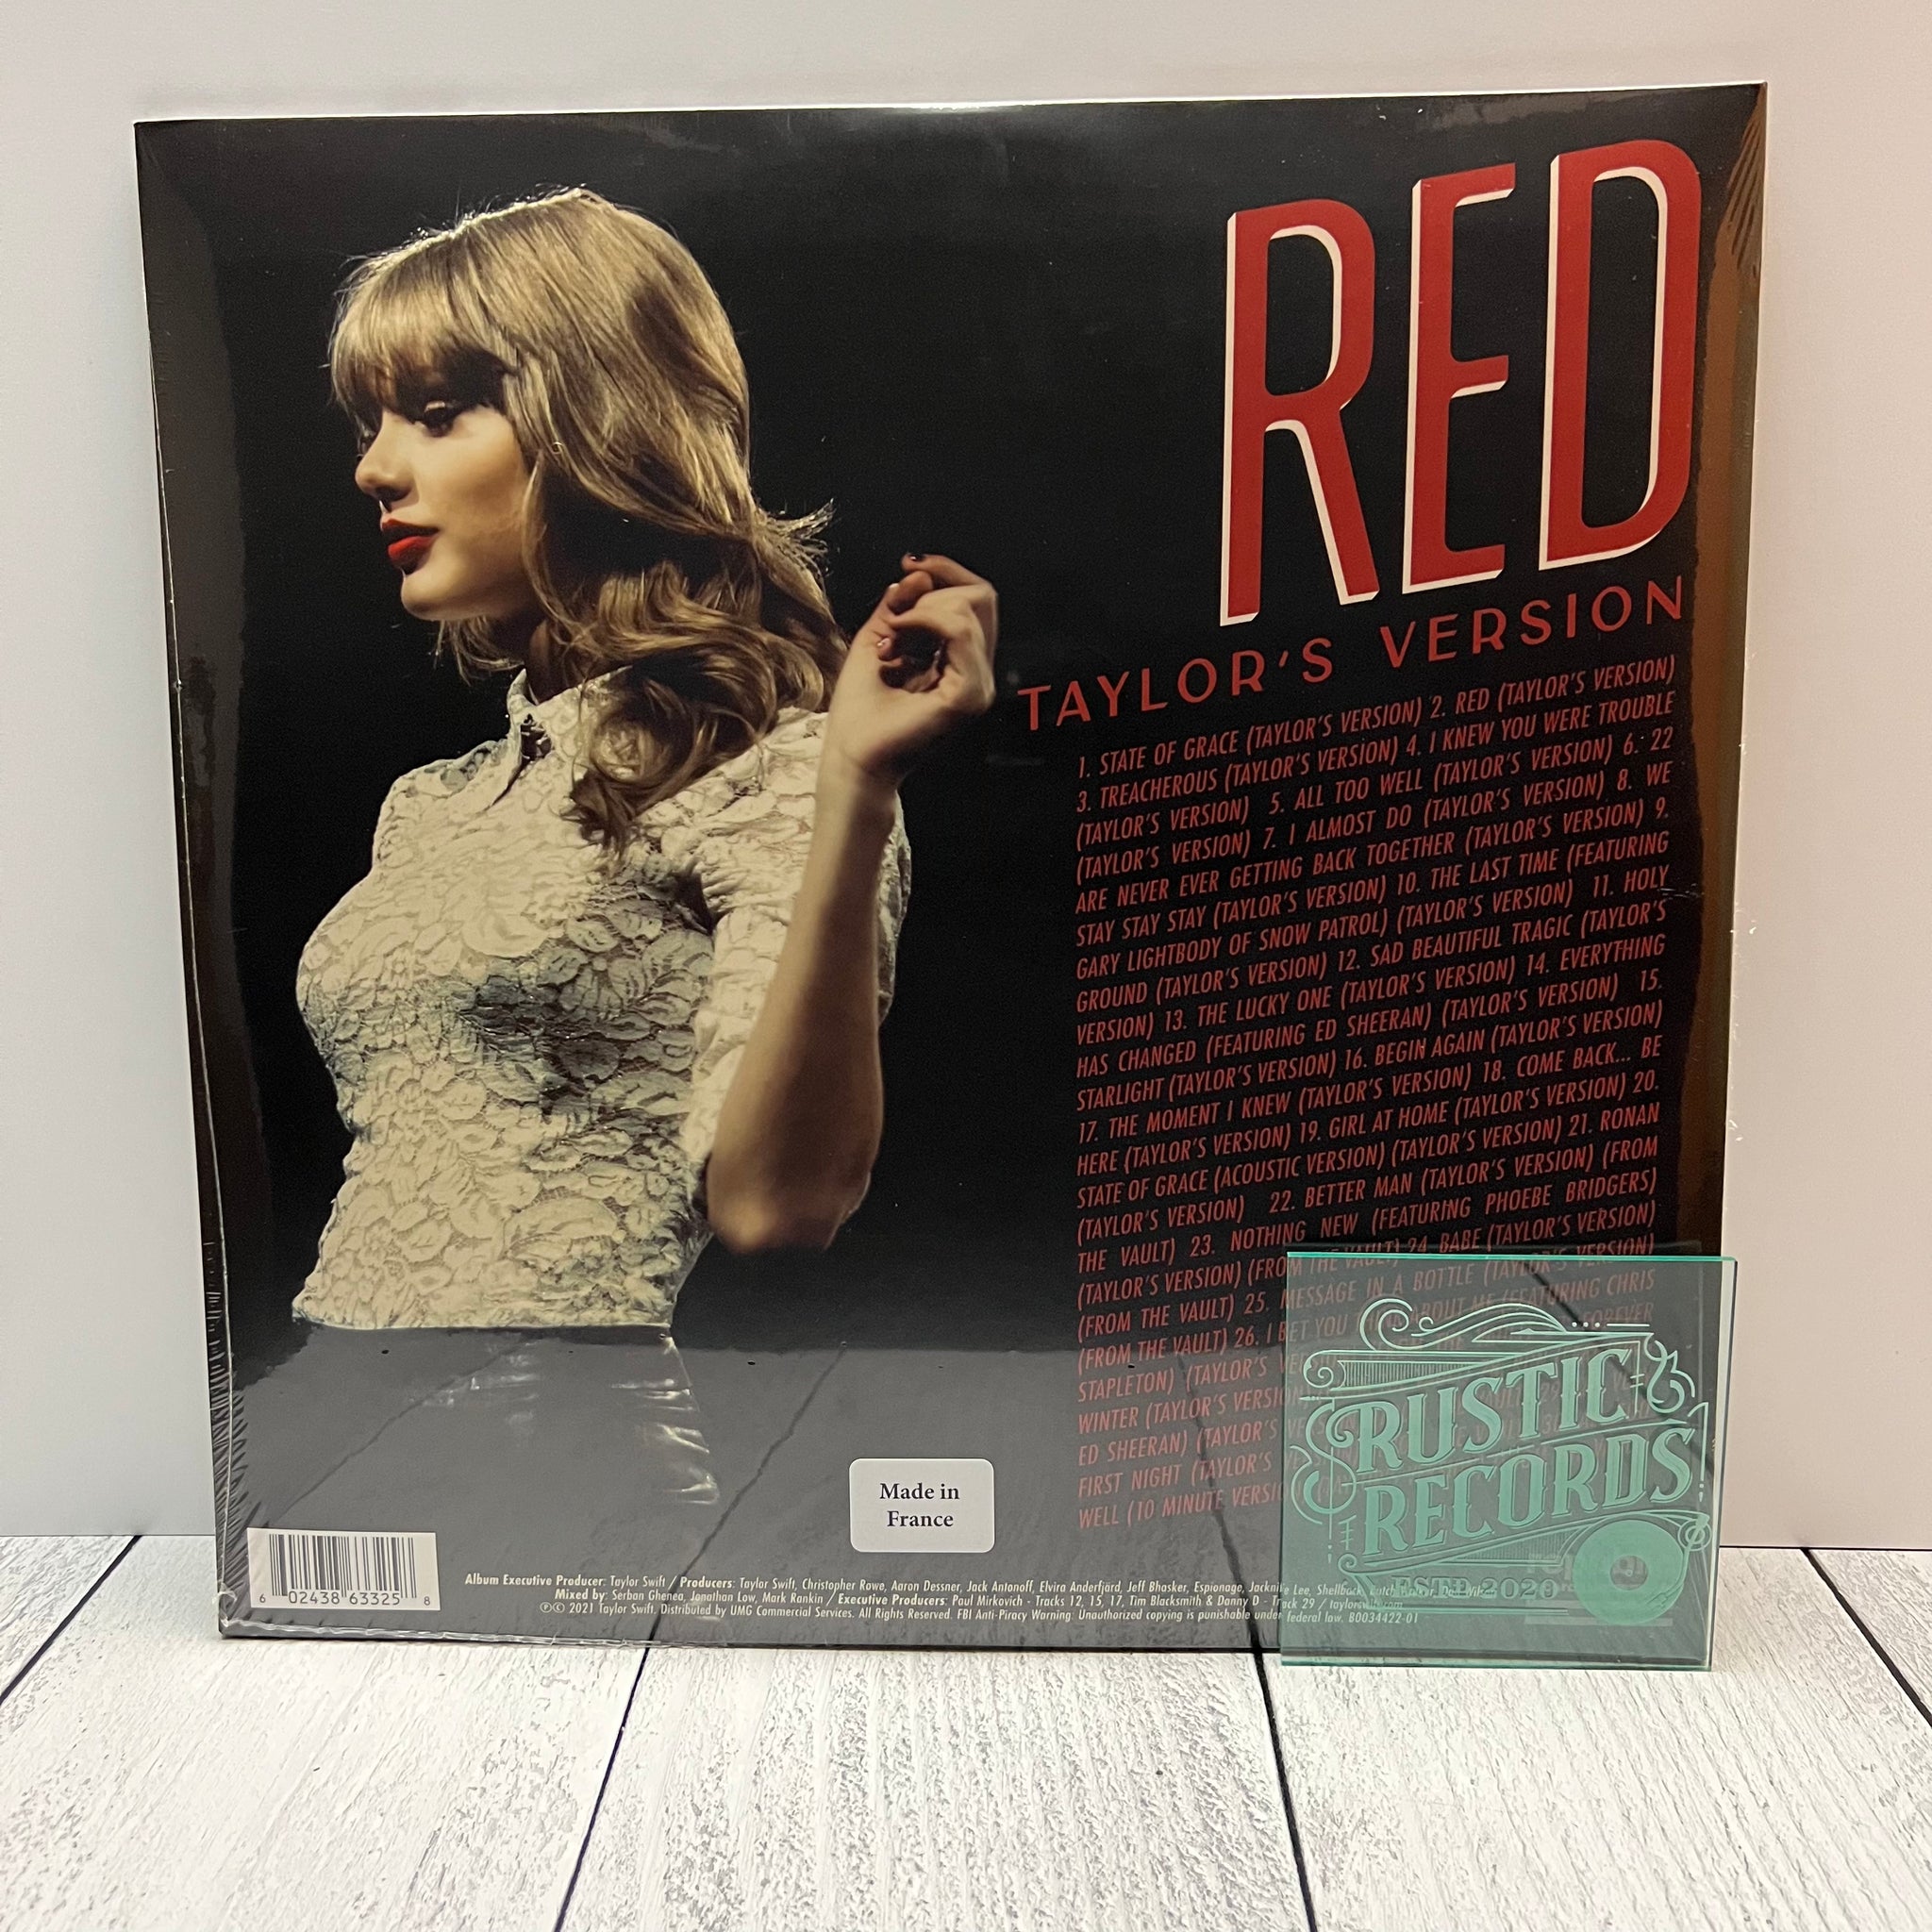 Taylor Swift - Red (Taylor's Version) – Rustic Records